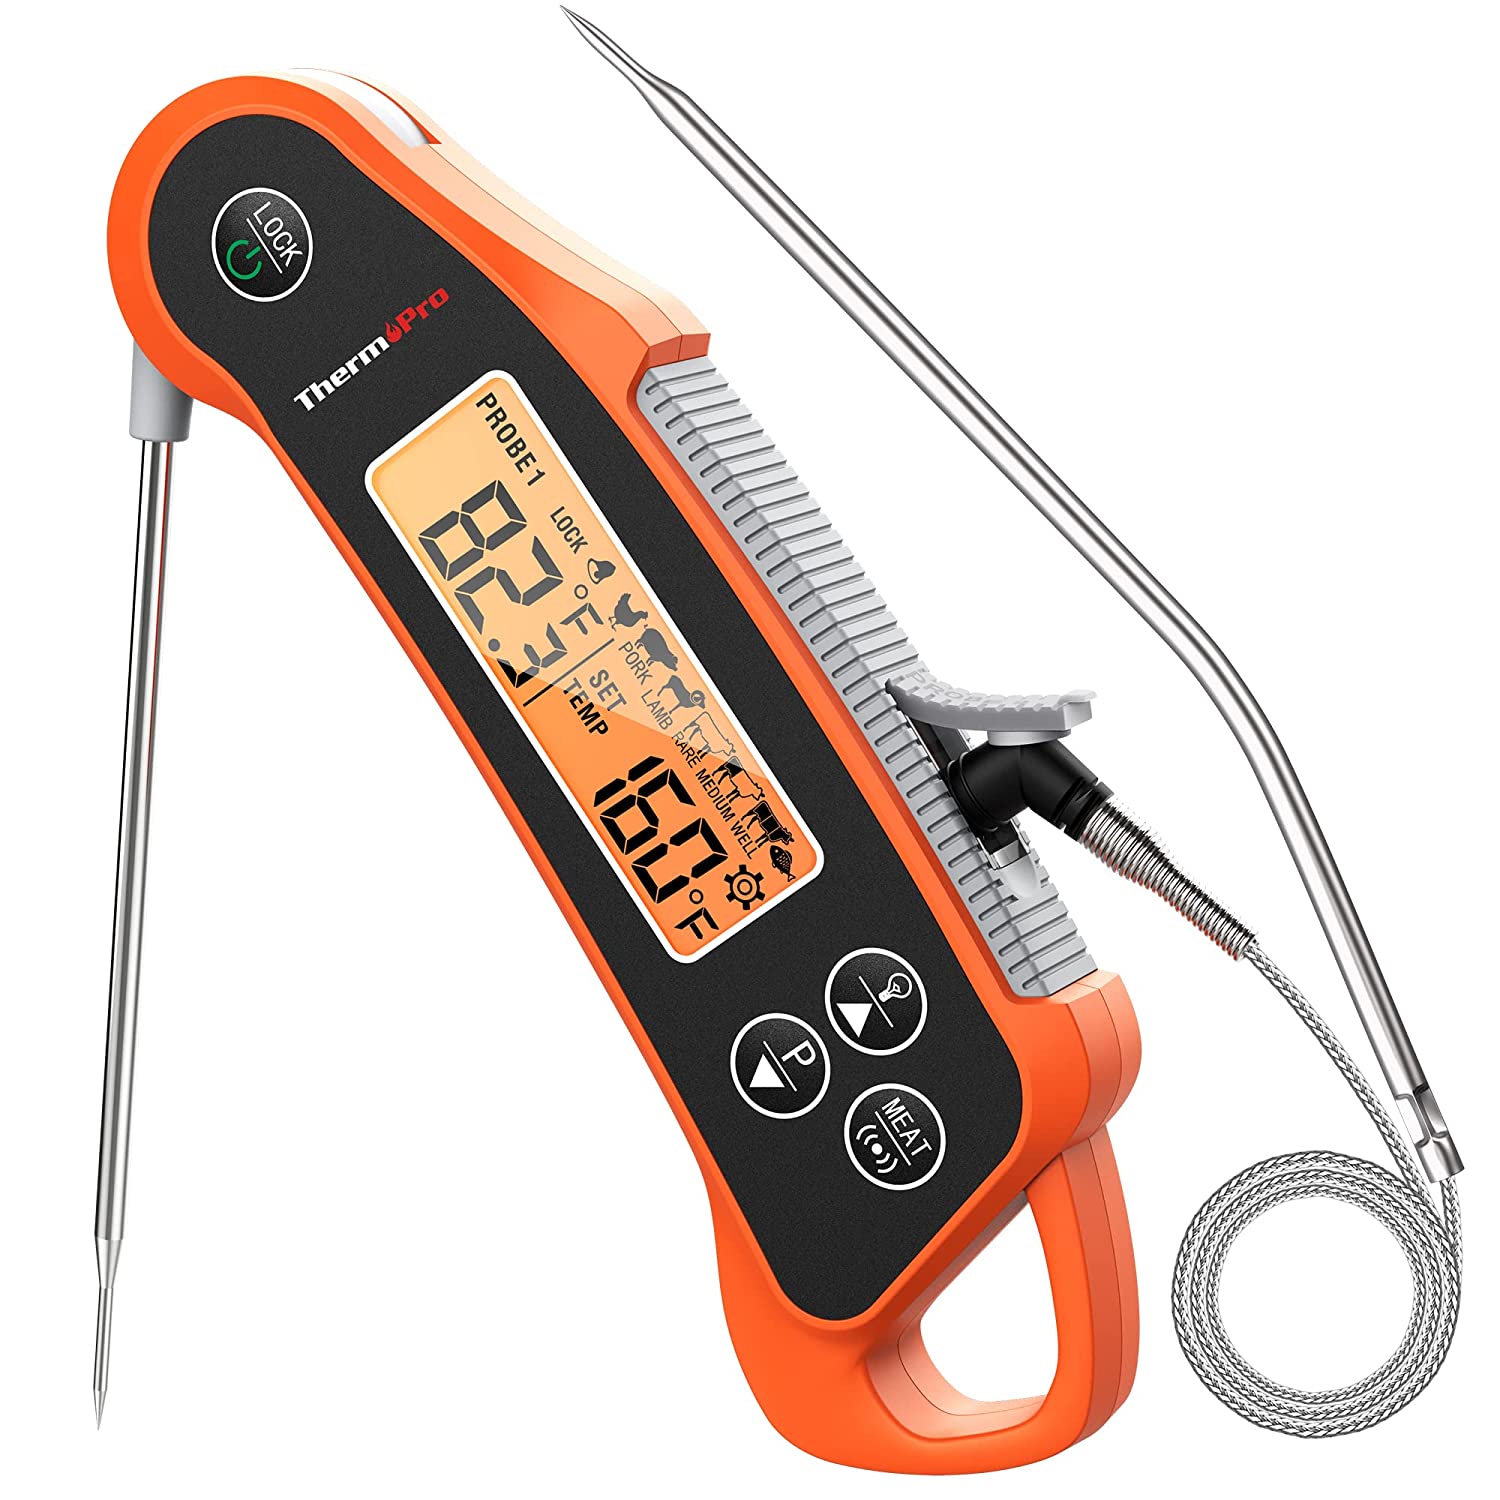 ThermoPro TP710 Instant Read Meat Thermometer Digital [...]